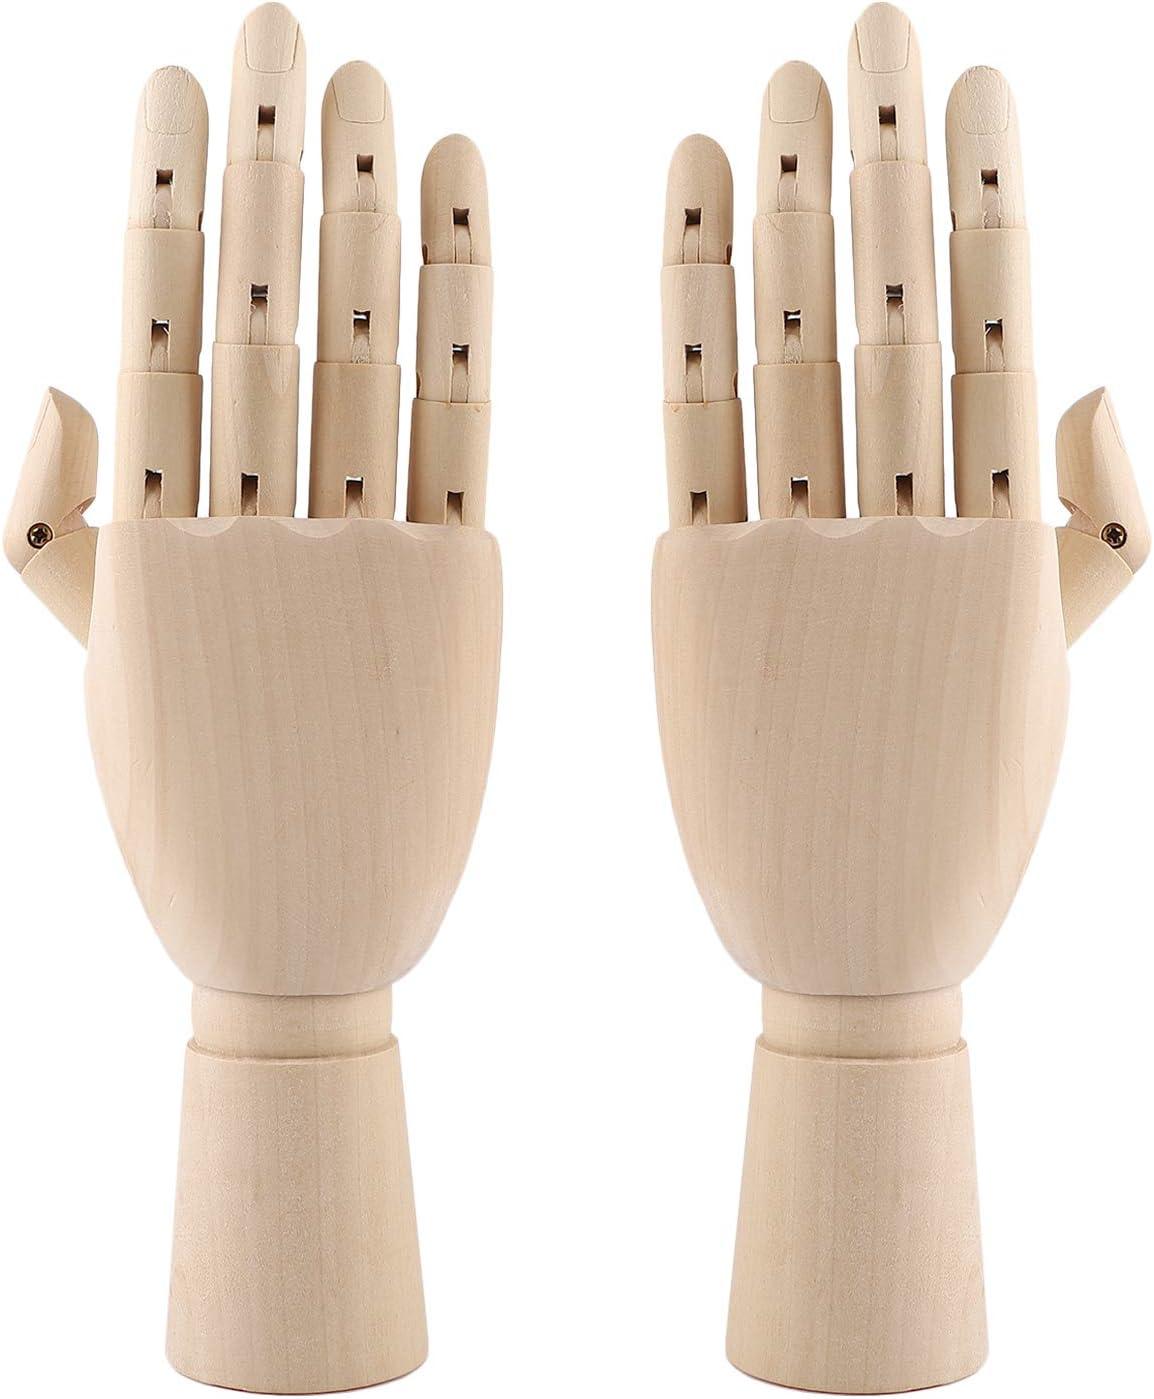 Flms Love Home 12 inch Wooden Hand Model Flexible Moveable Fingers Manikin Hand Figure Left/Right Hand Model for Drawing, Sketching, Painting